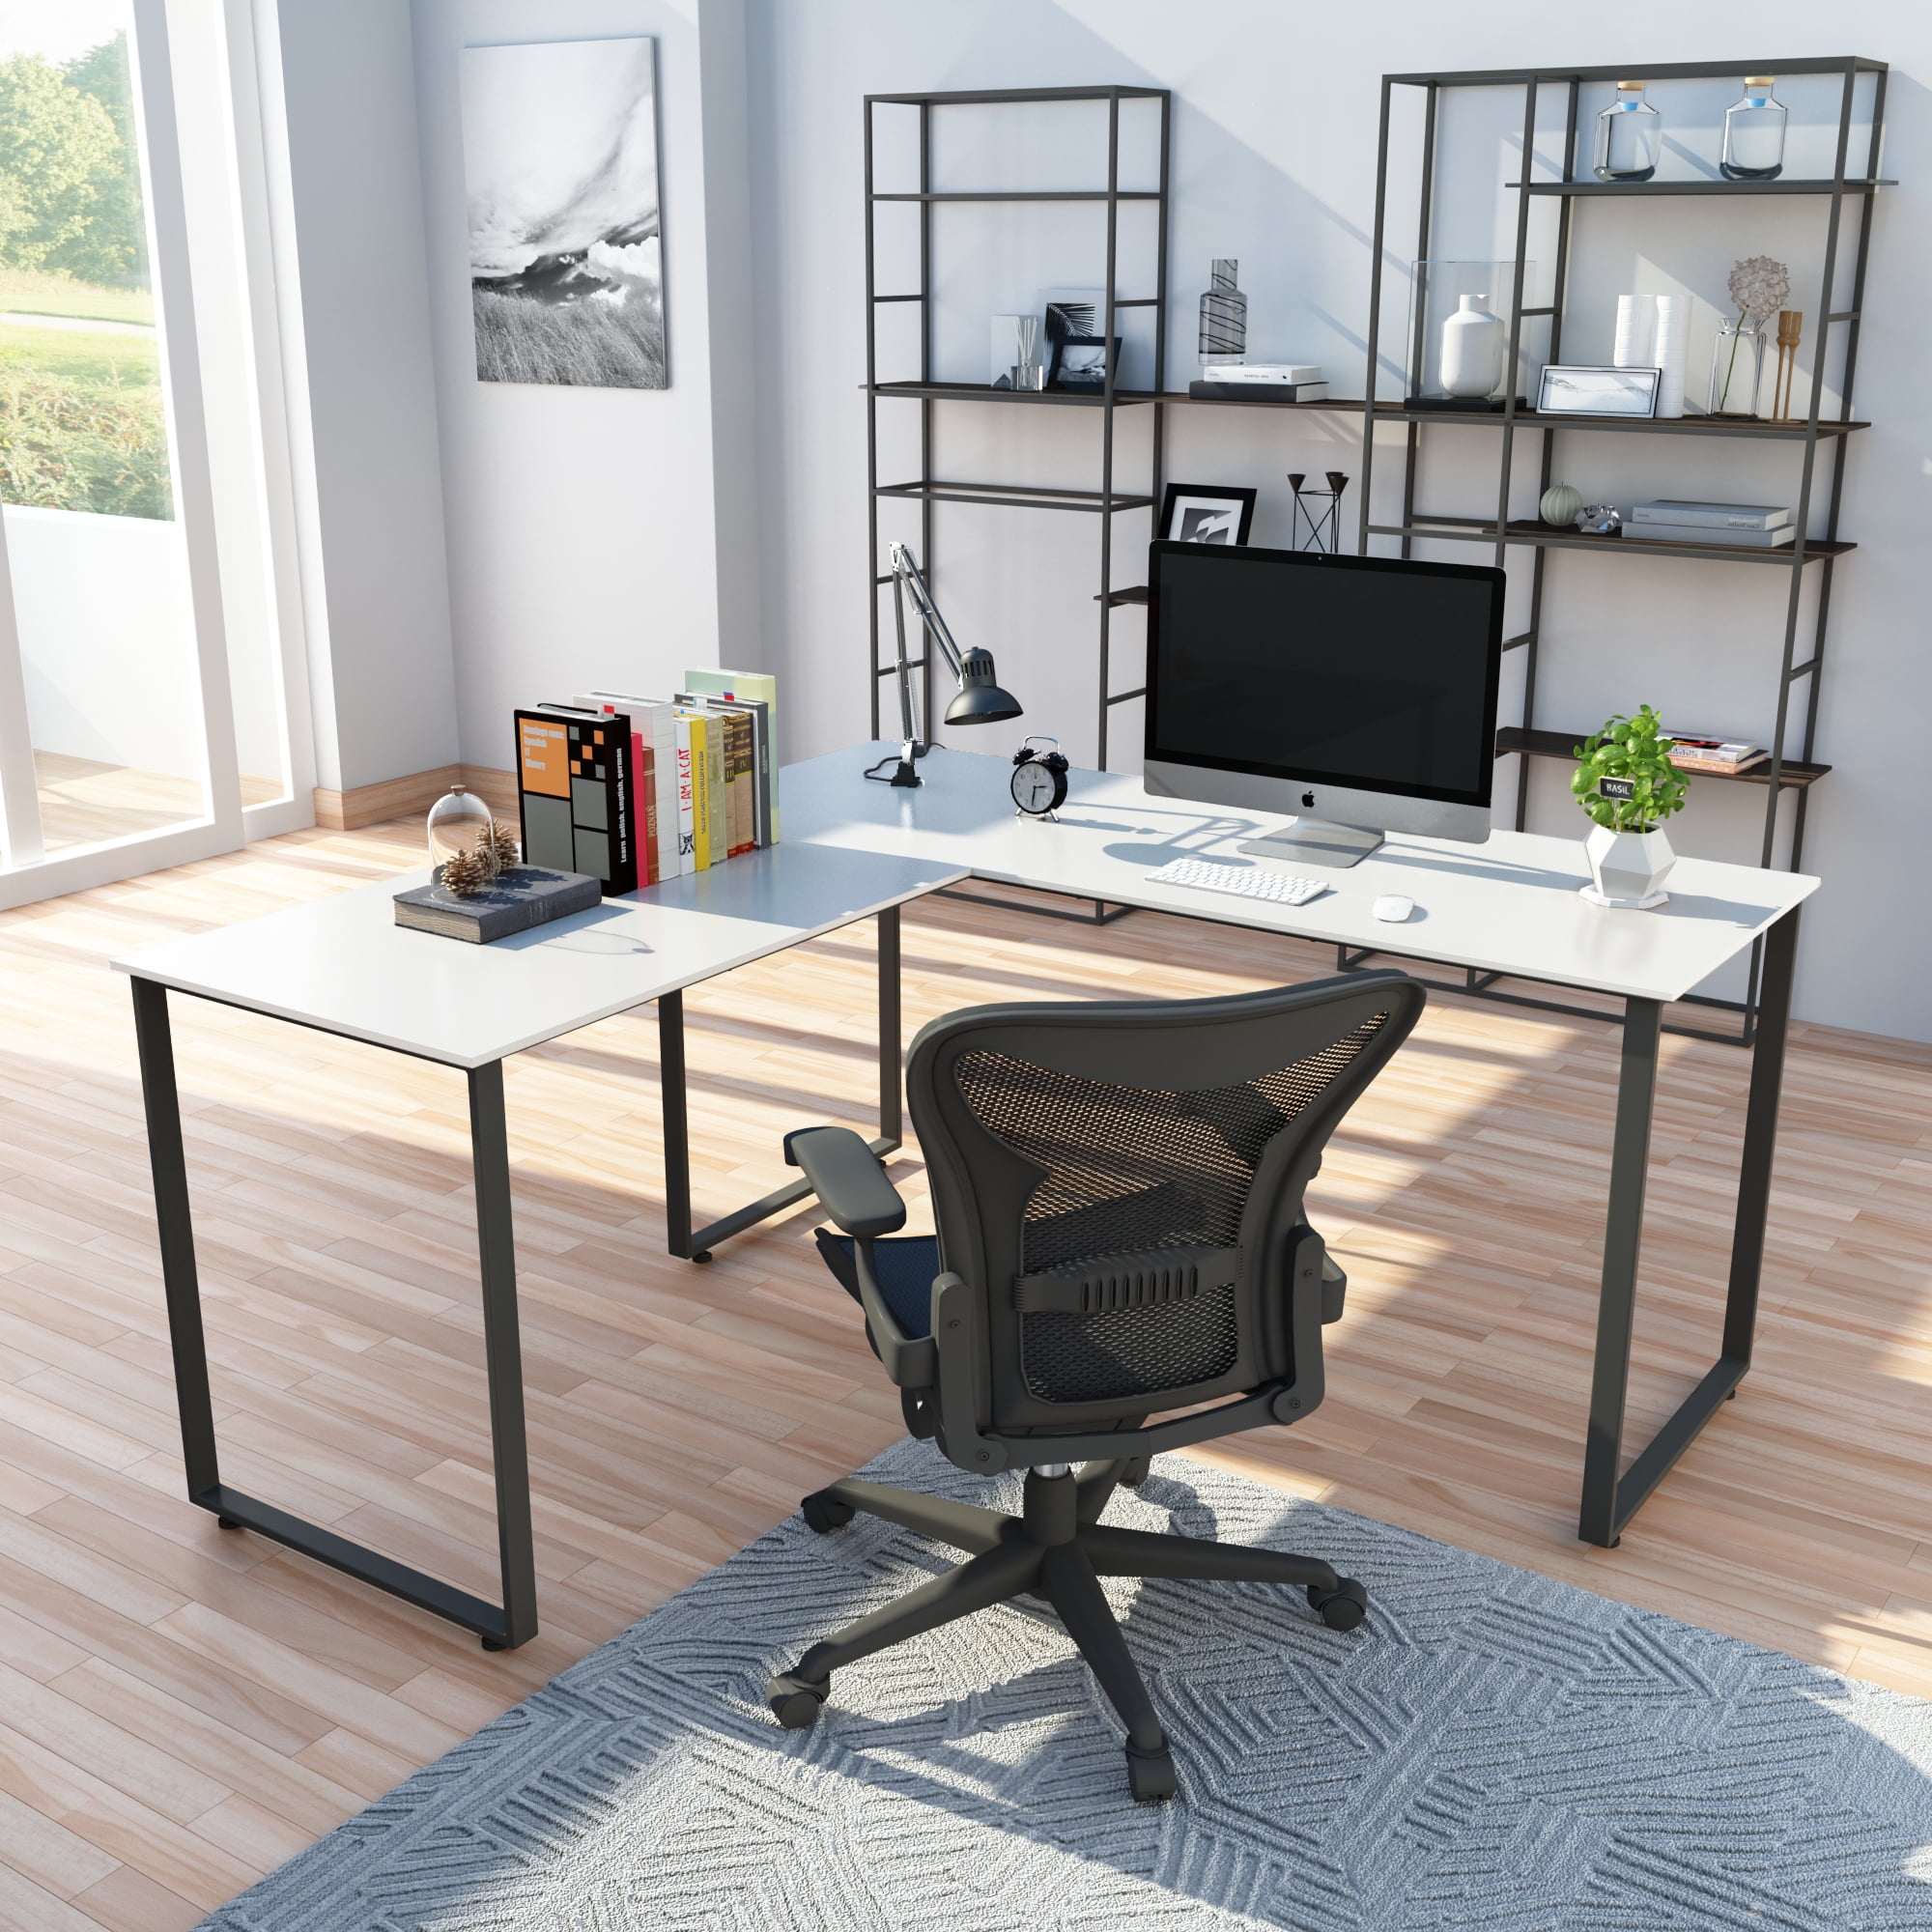 Details about   Computer Desk Gaming Table Writing Study Glass Desk Workstation for Home Office 